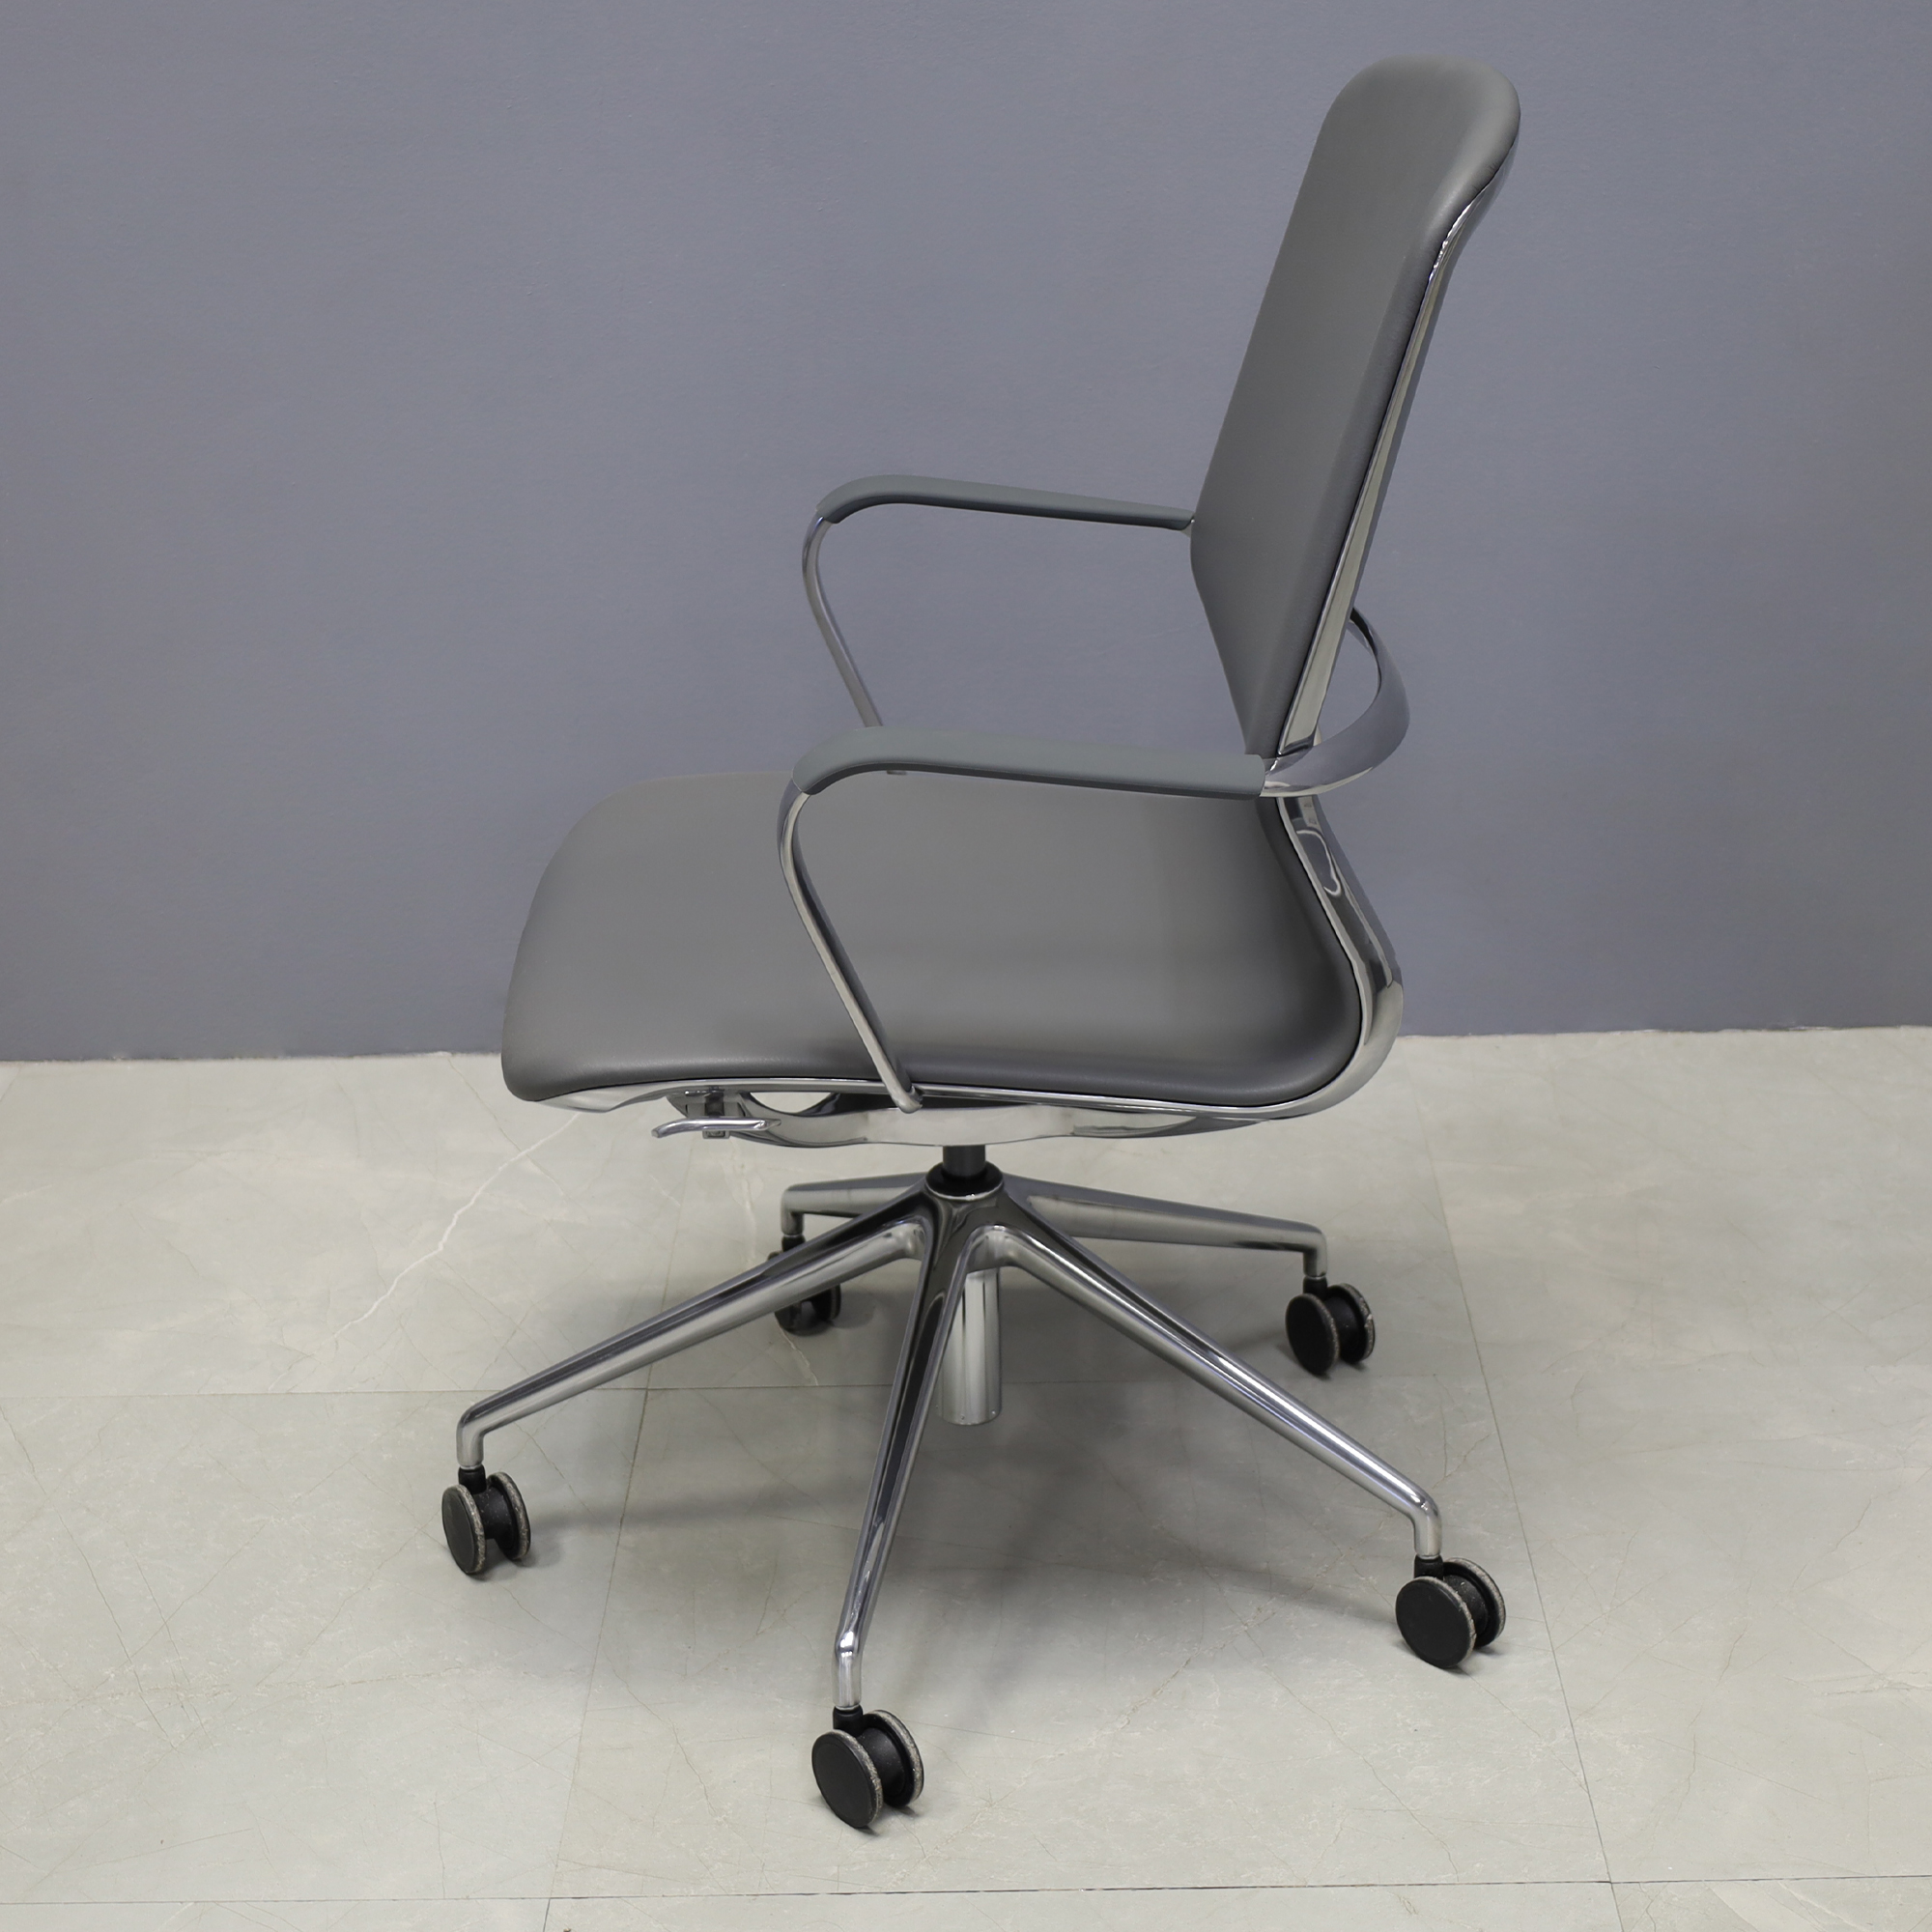 Arpina Conference and Meeting Room Chair in gray upholstery, shown here.